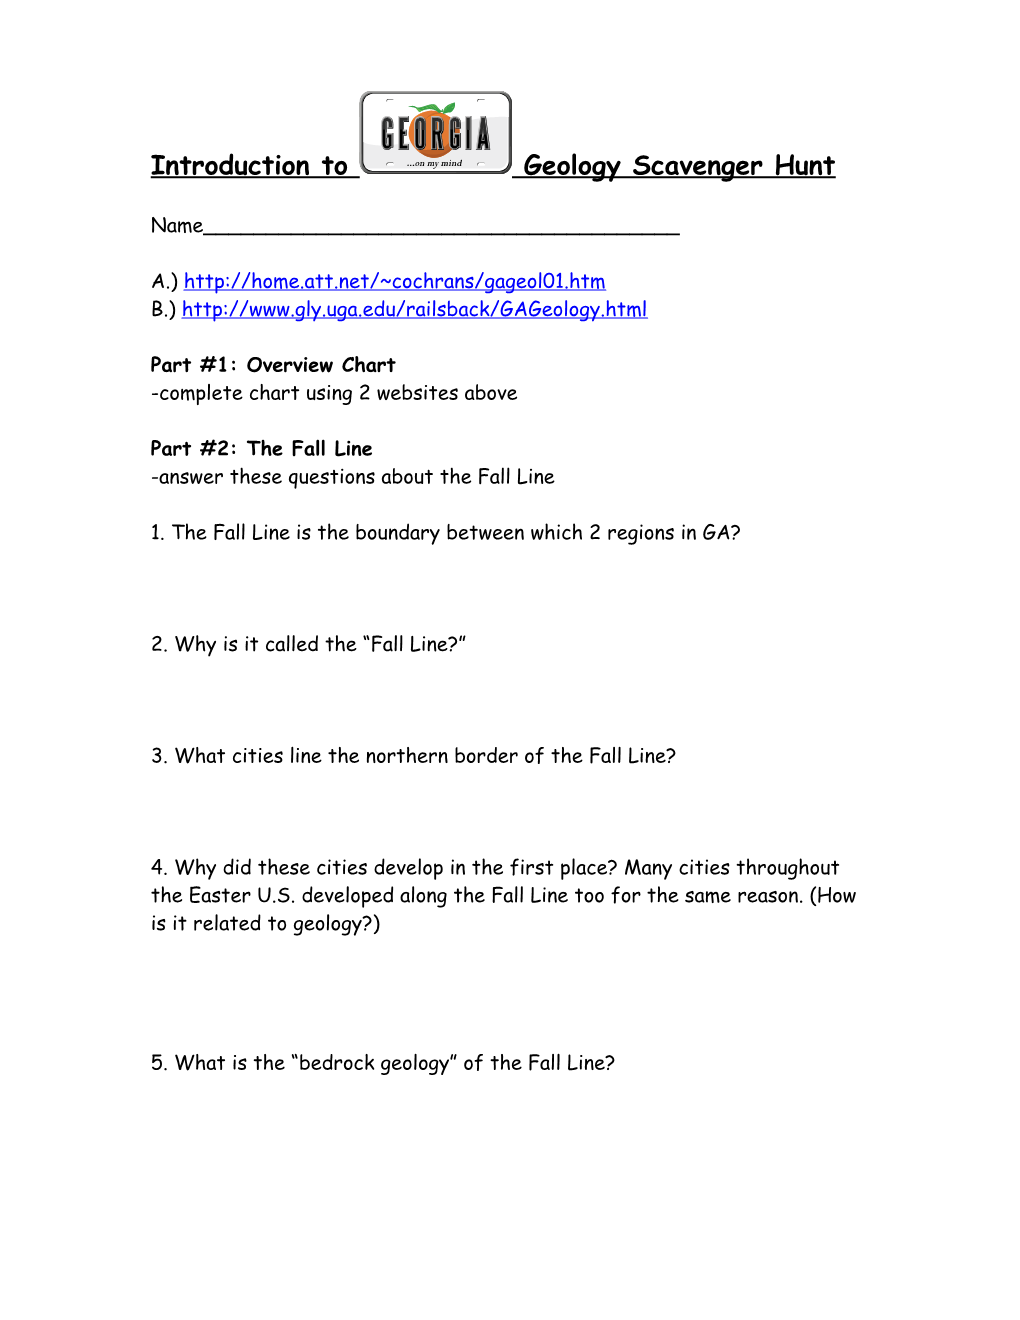 Introduction to Geology Scavenger Hunt